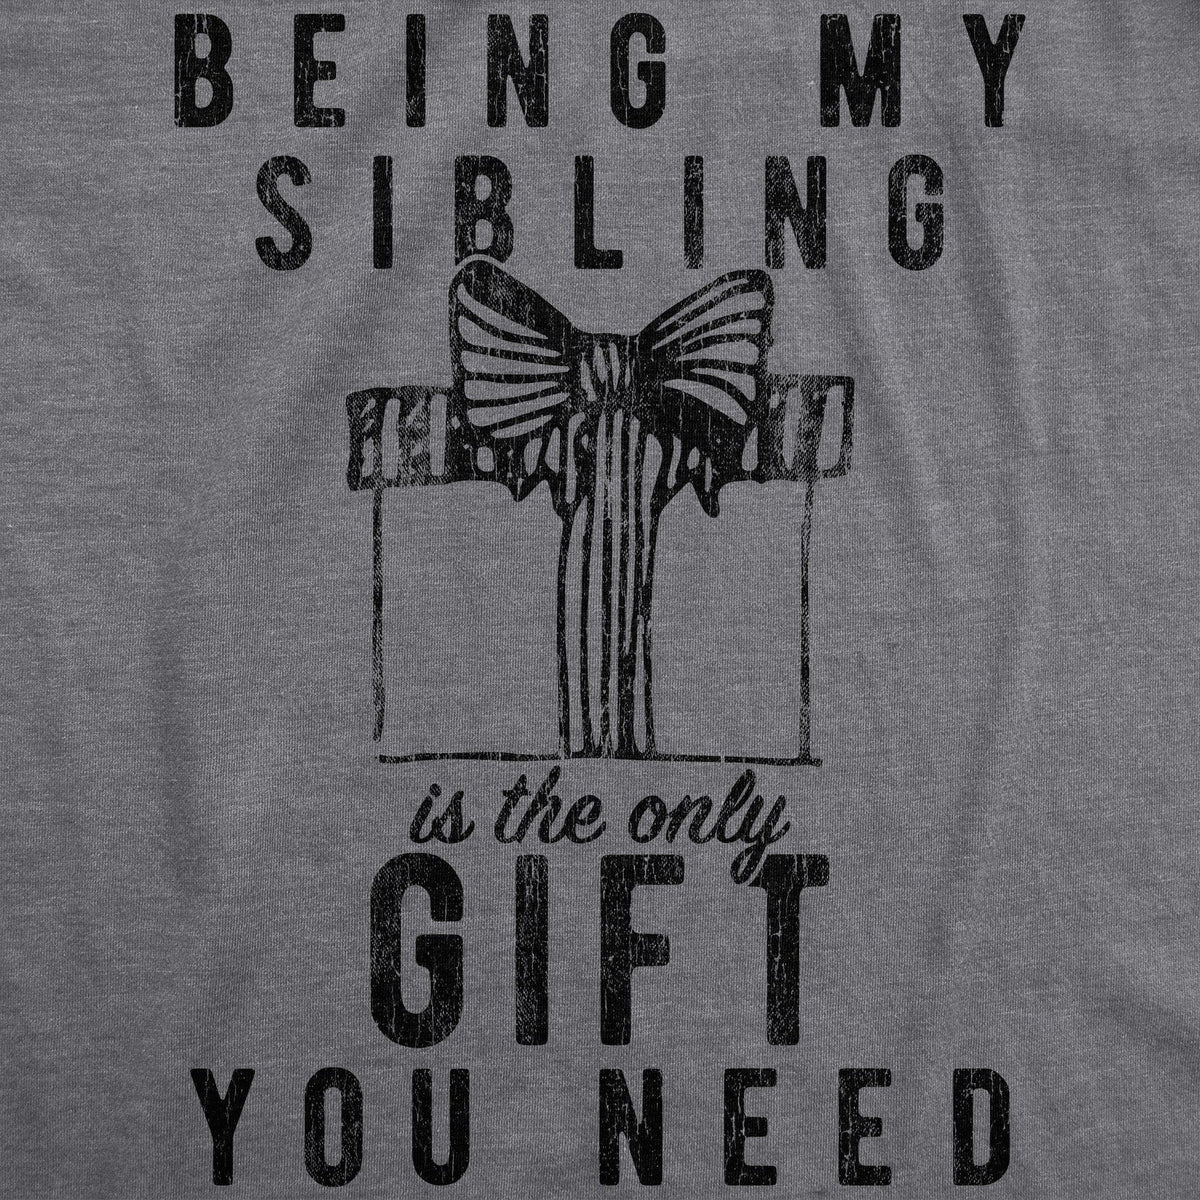 Being My Sibling Is The Only Gift You Need Women&#39;s Tshirt - Crazy Dog T-Shirts